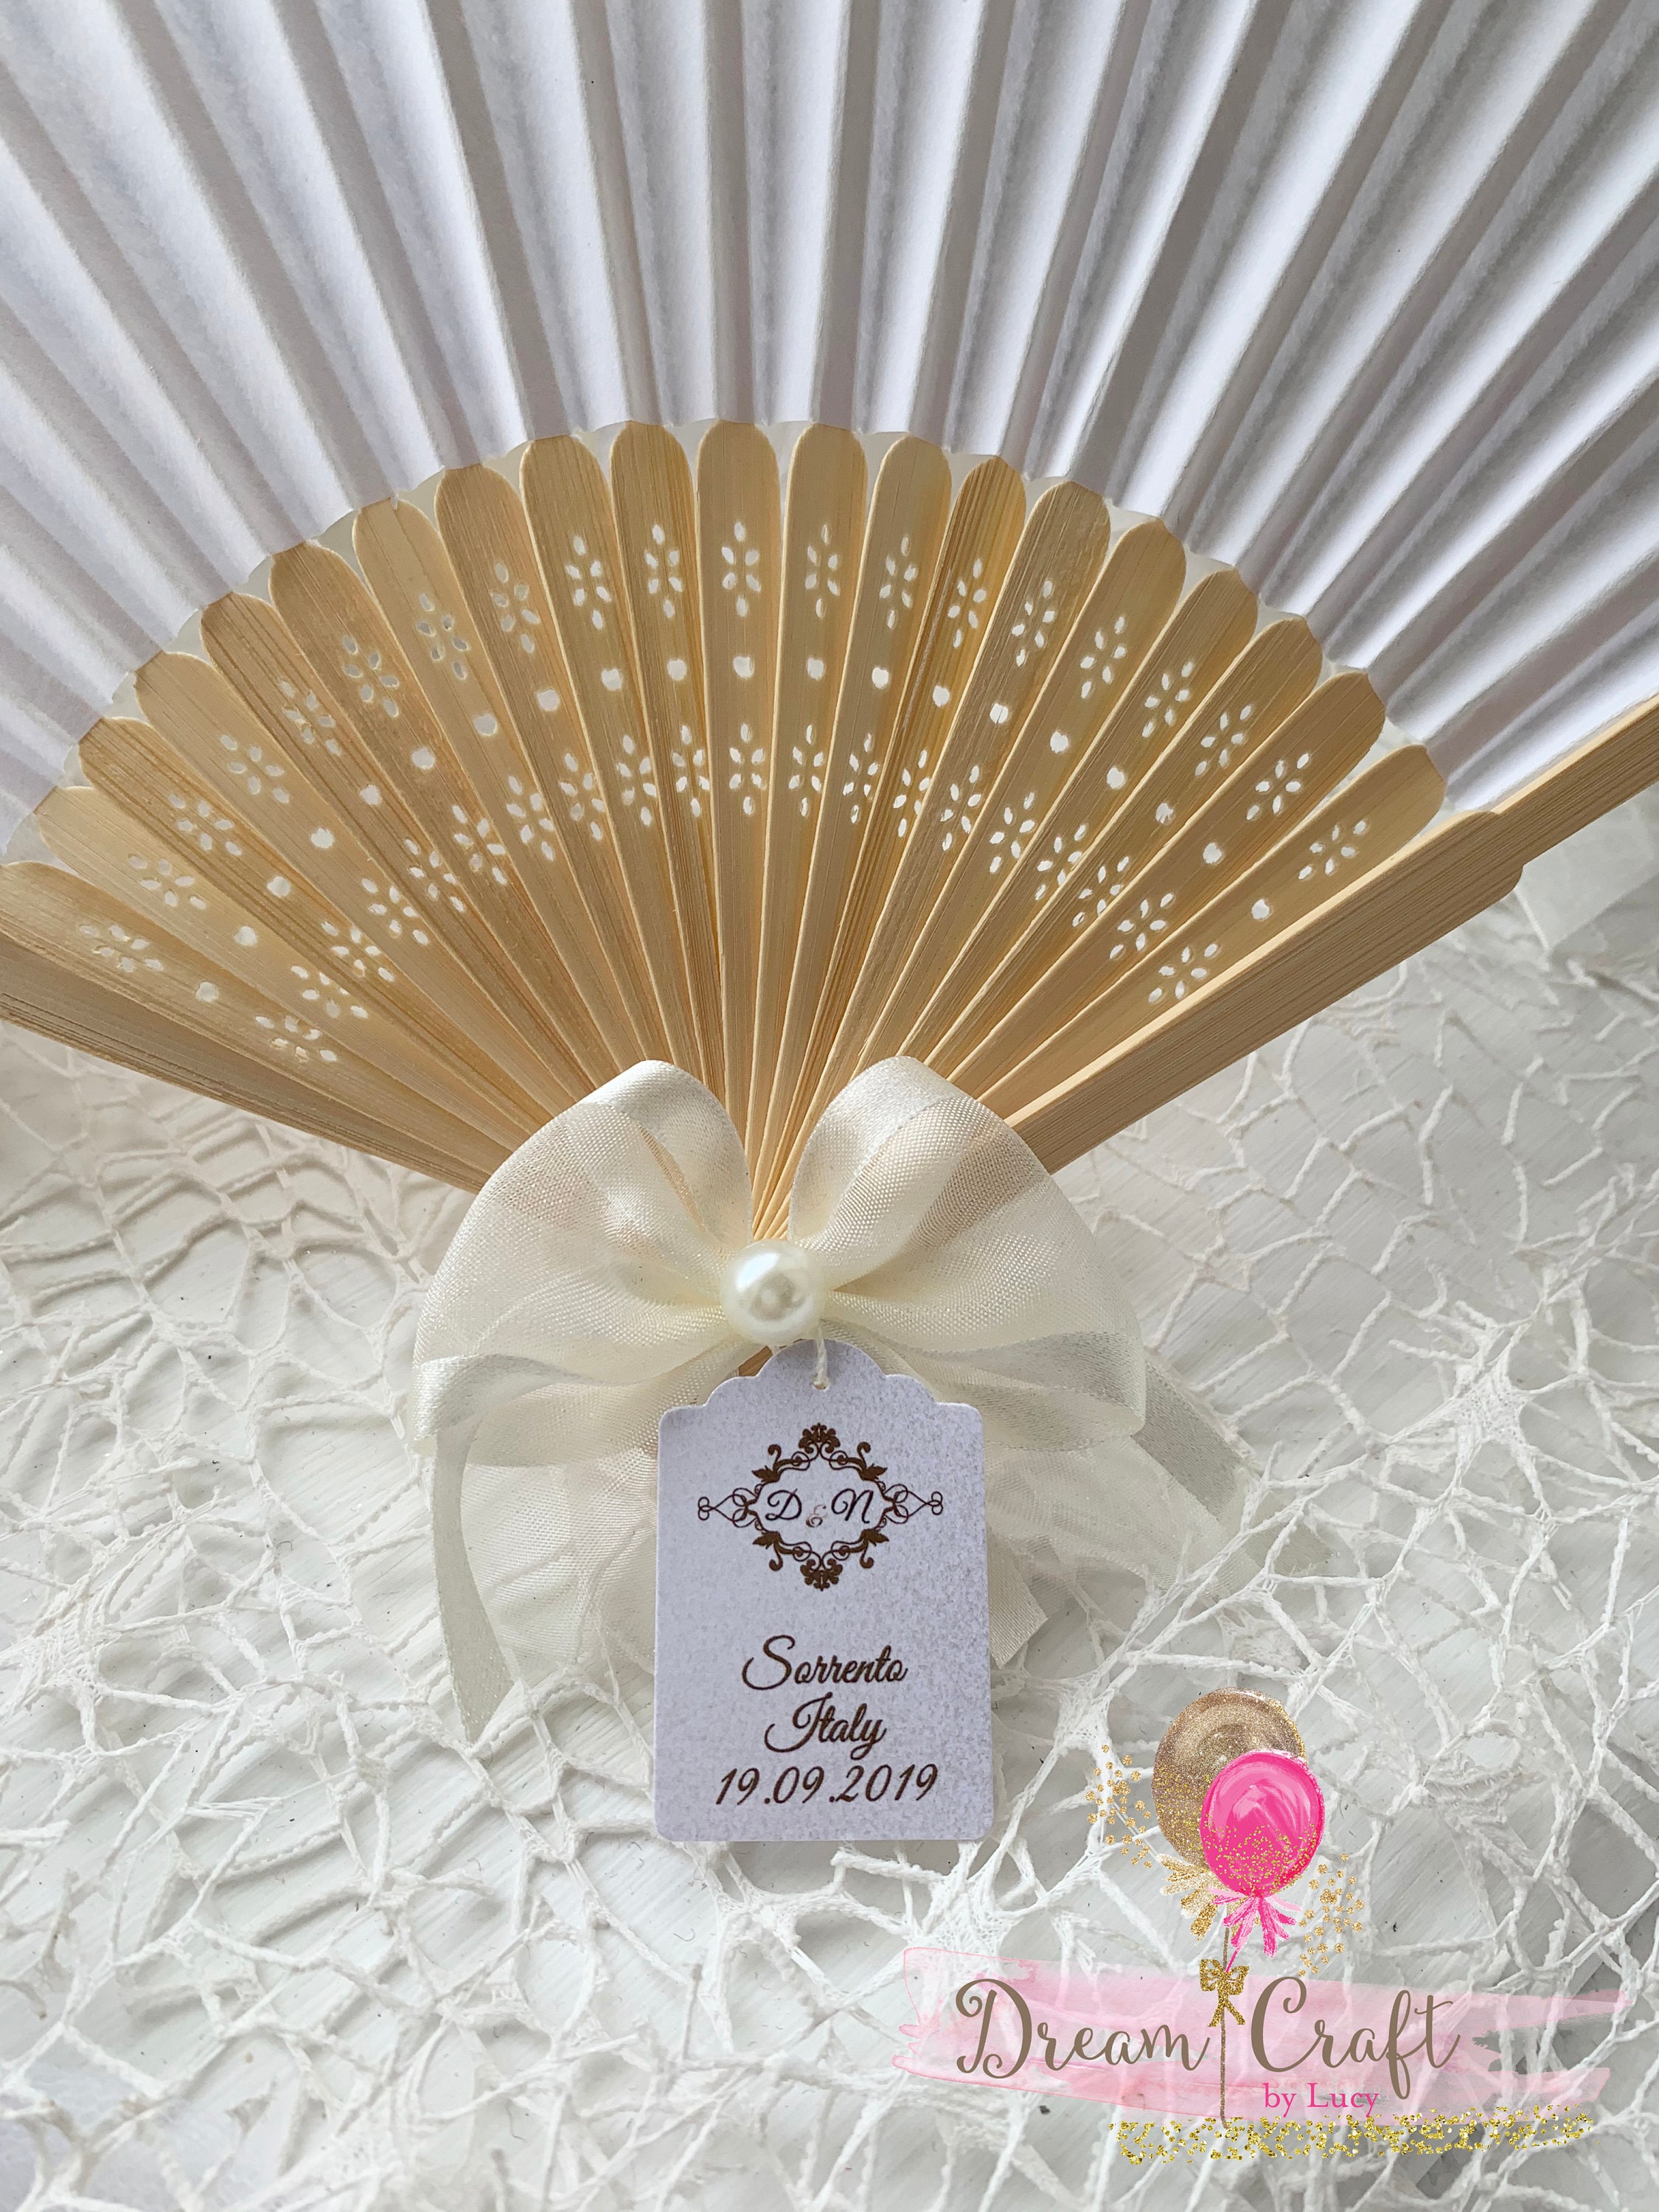 10 White Wedding Hand Fans made of Paper and Bamboo with | Etsy